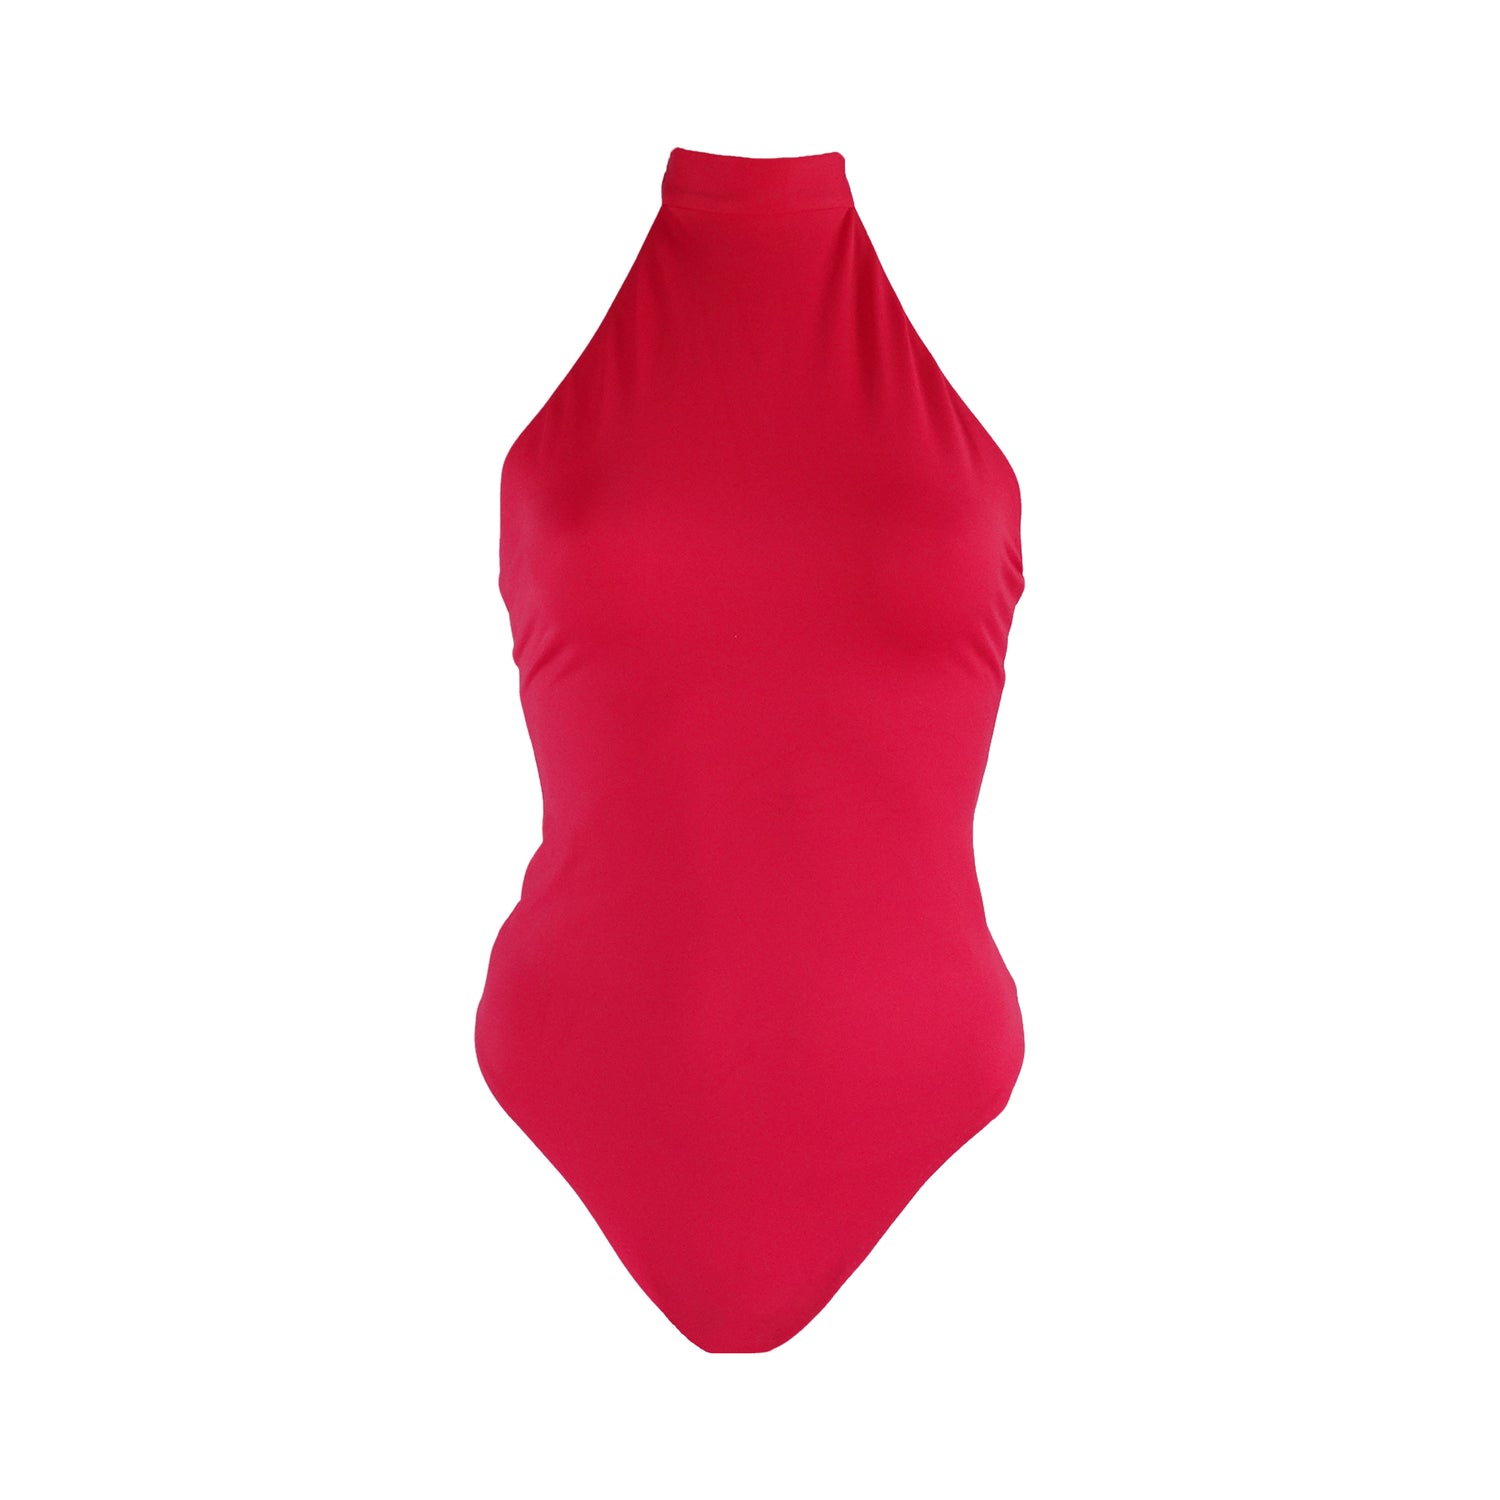 Red Tie mock neck halter one piece swimsuit with a low back, high cut legs and cheeky bum coverage.